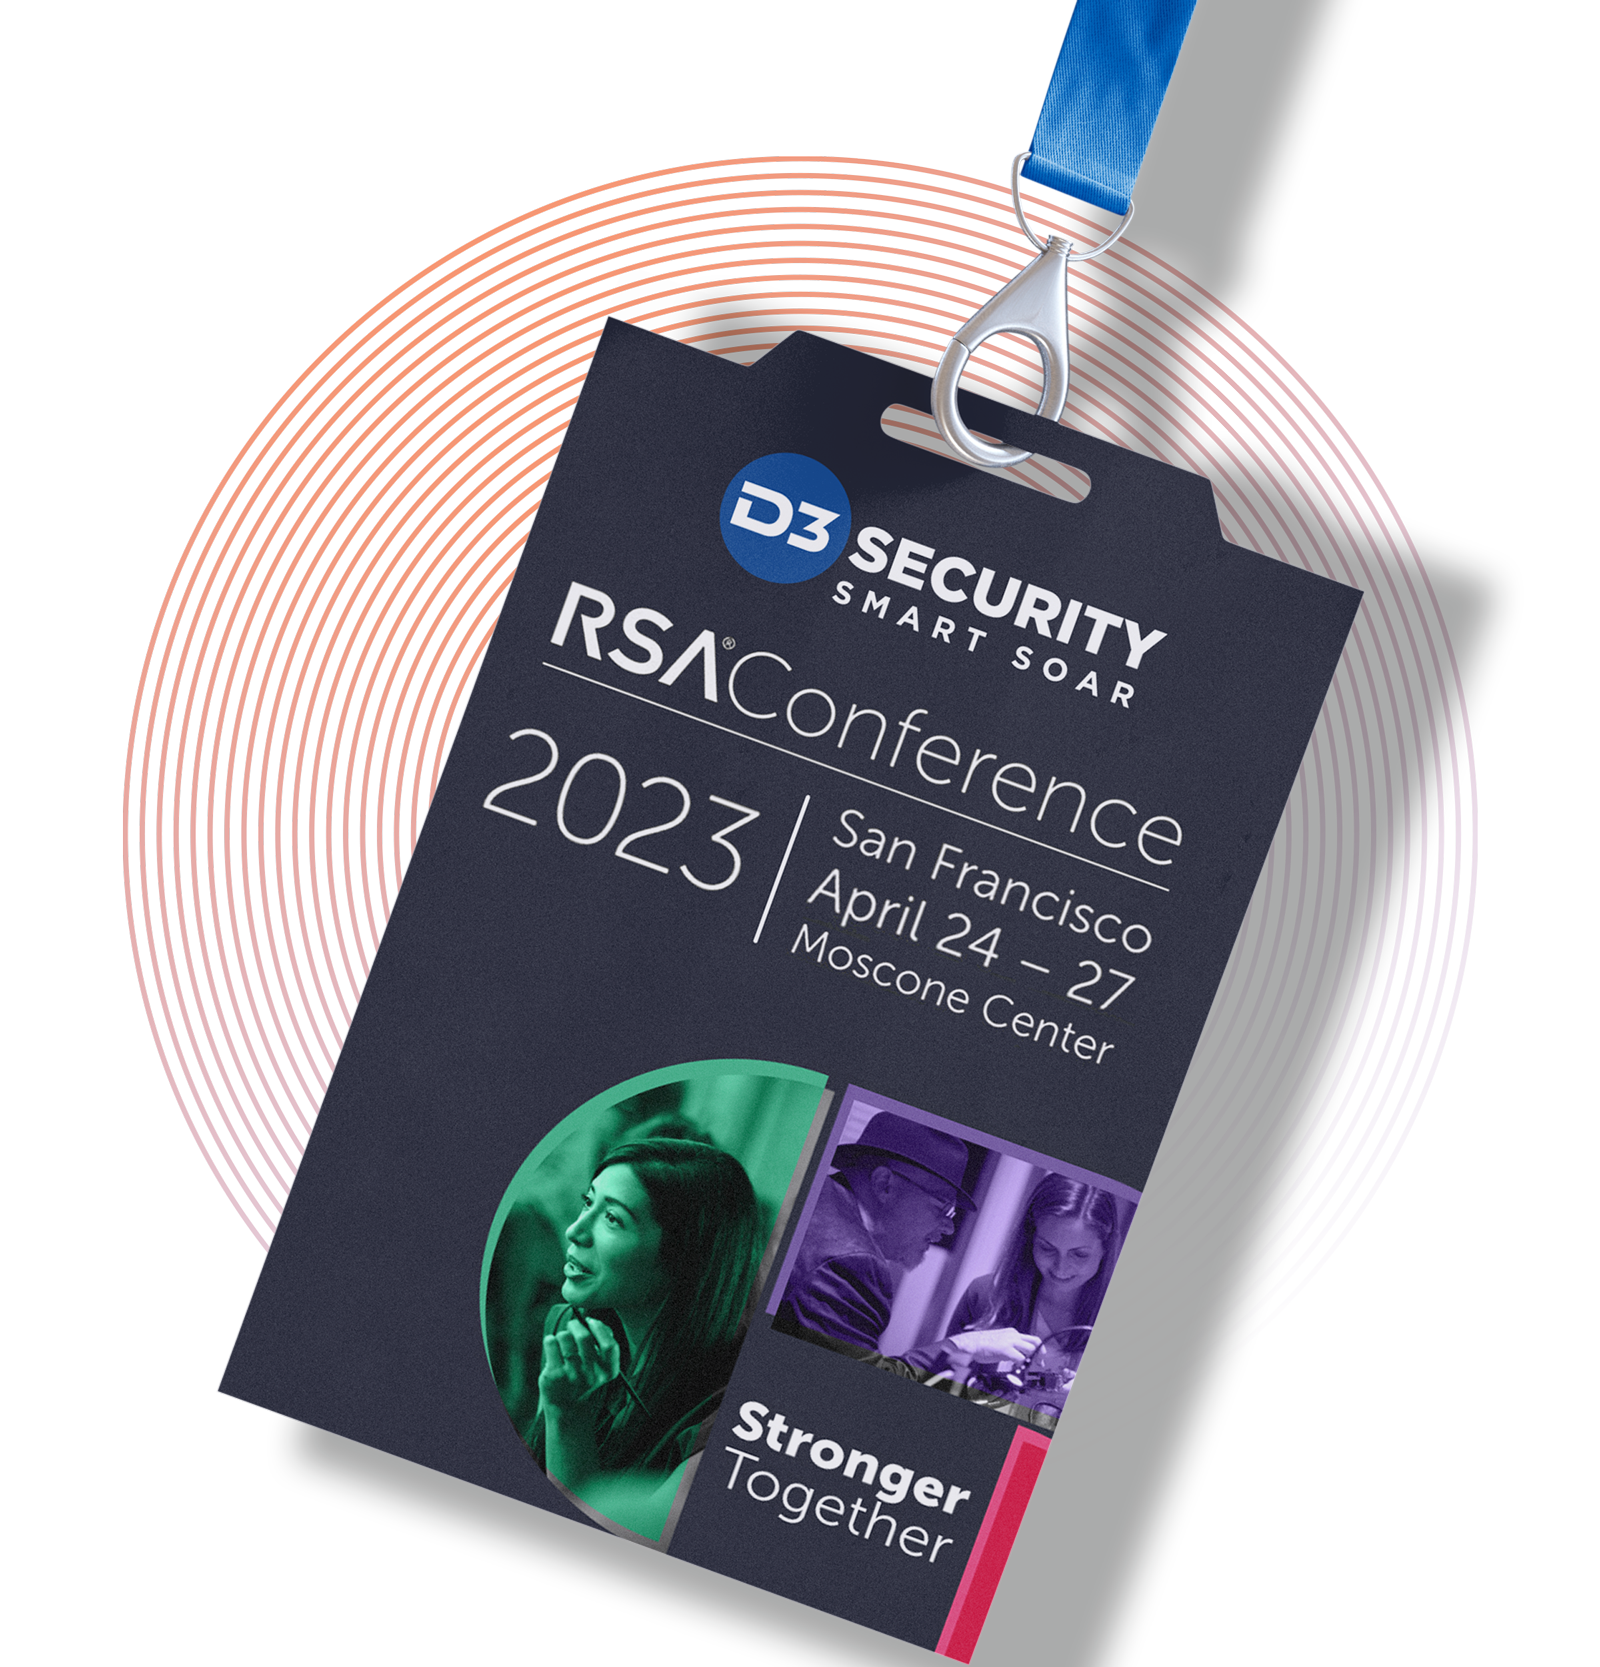 Claim your free Expo Pass to RSAC 2023